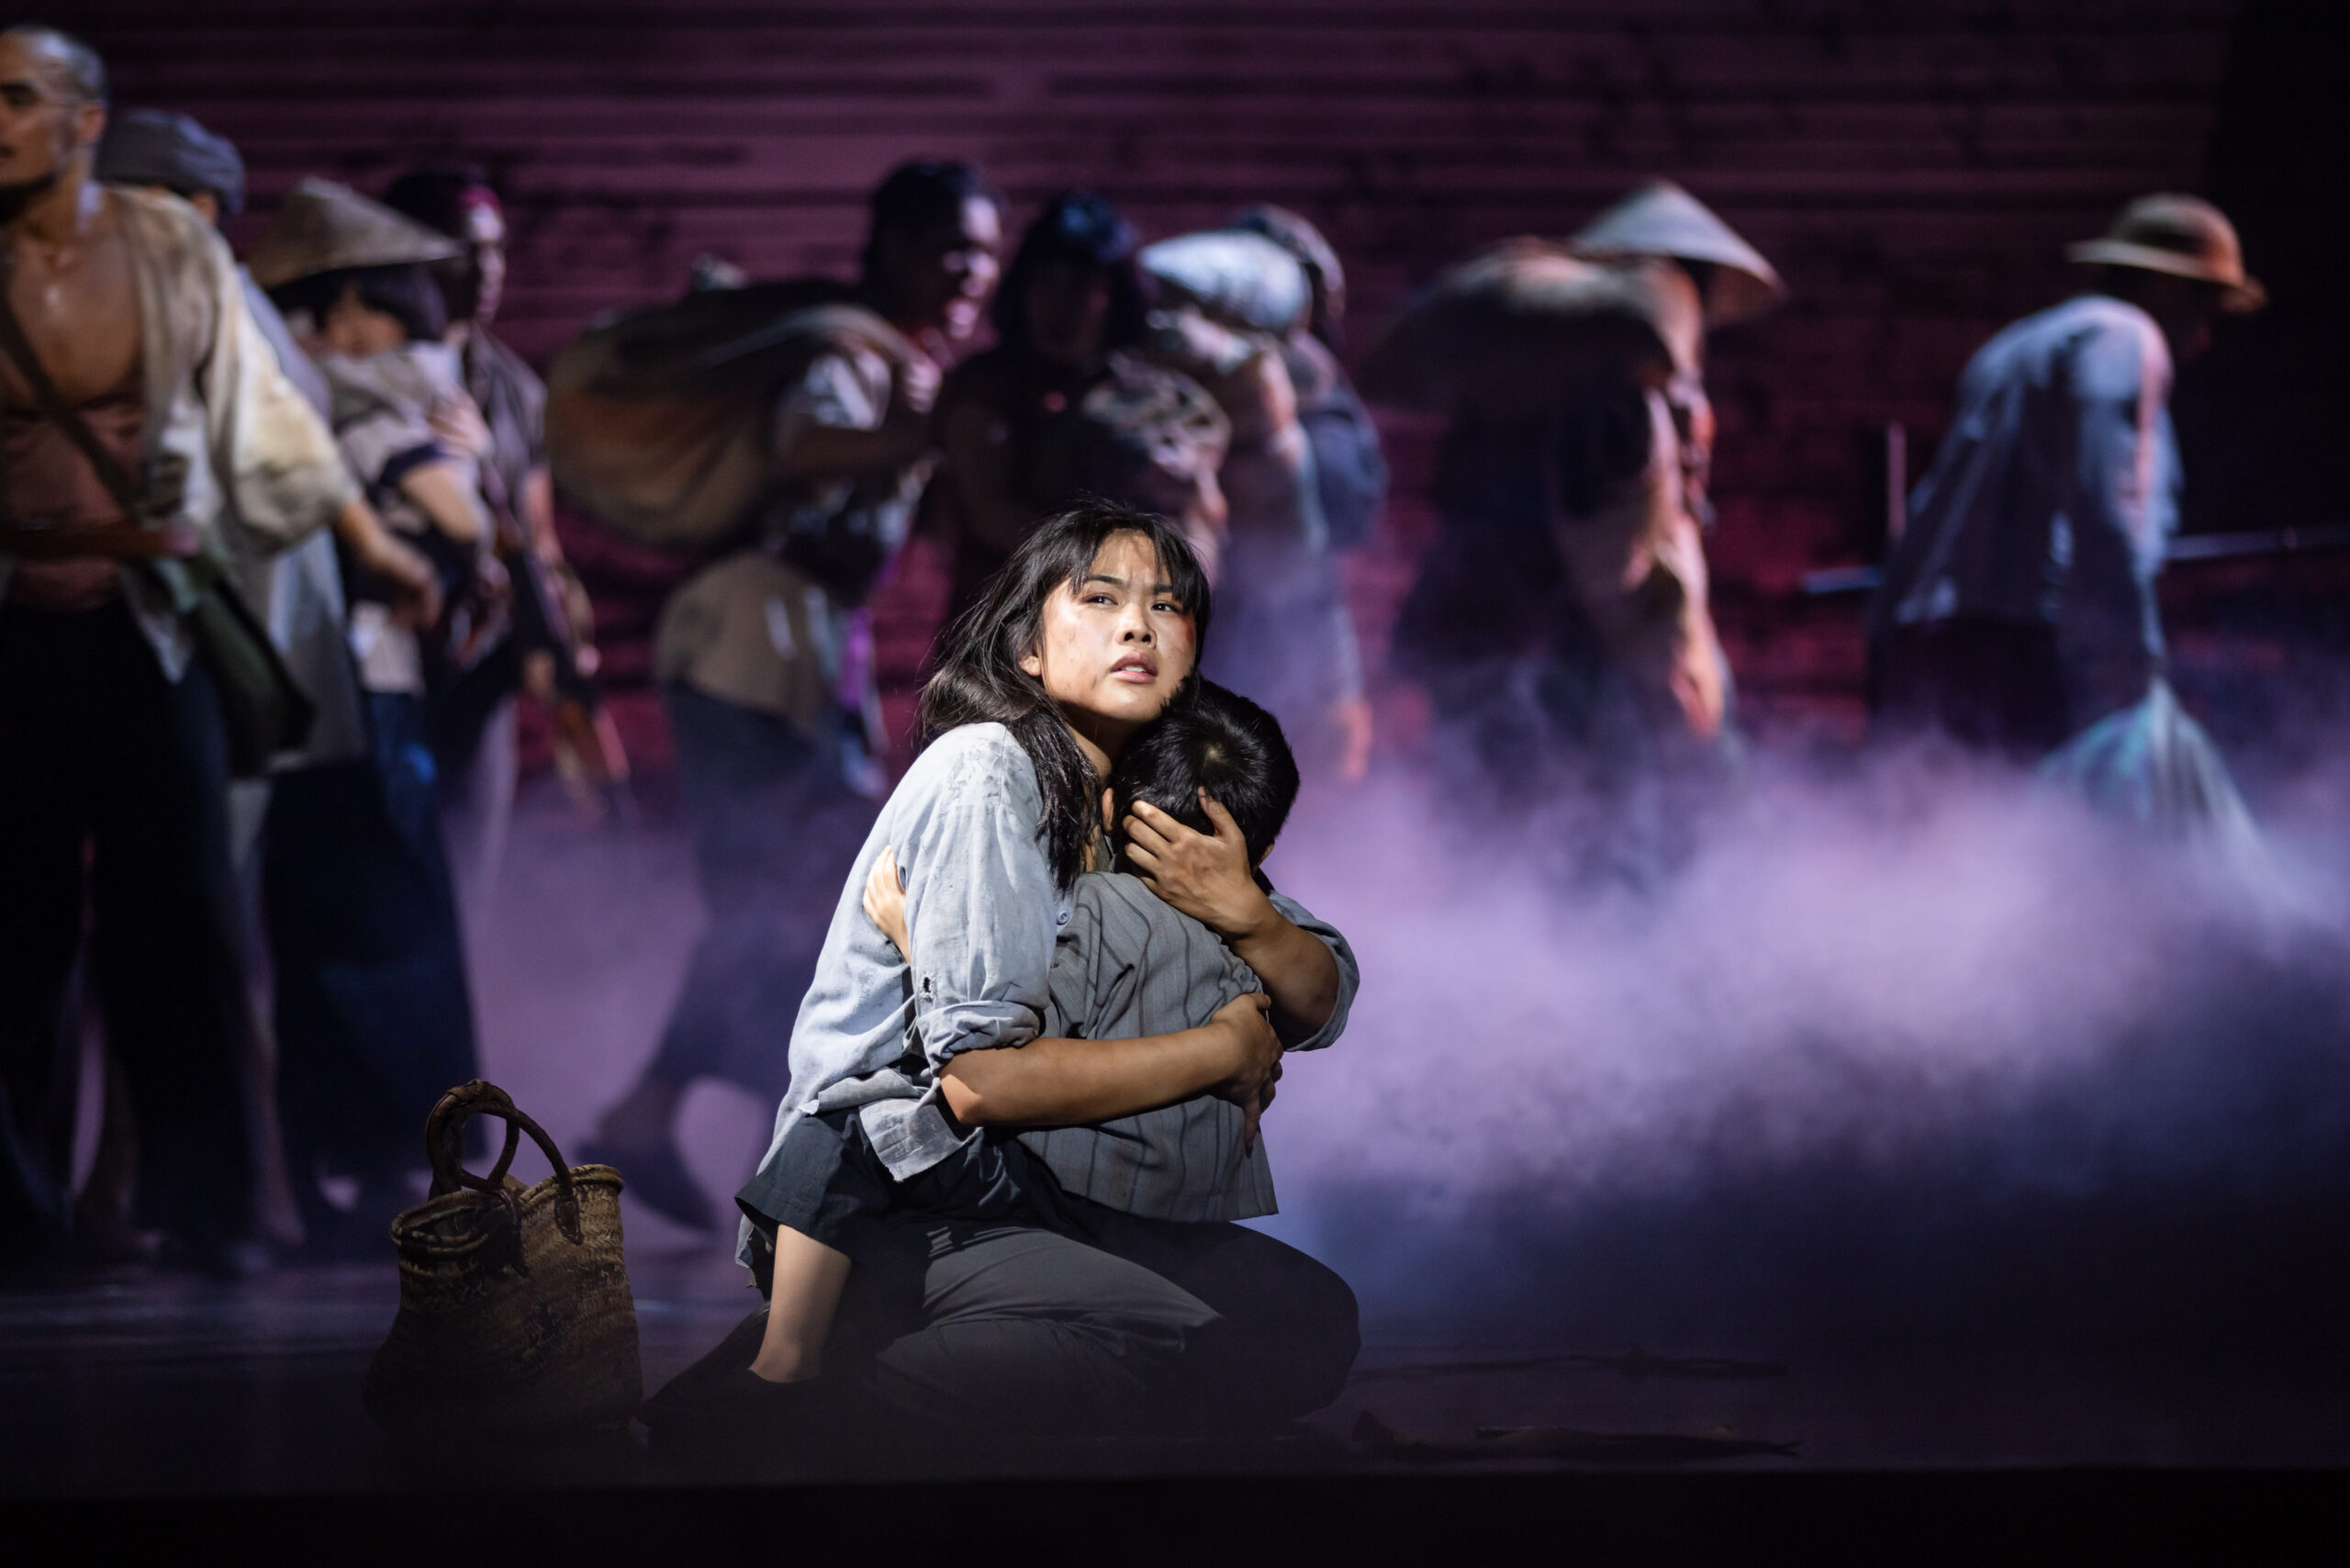 INTRODUCING THE CAST OF MISS SAIGON IN MANILA